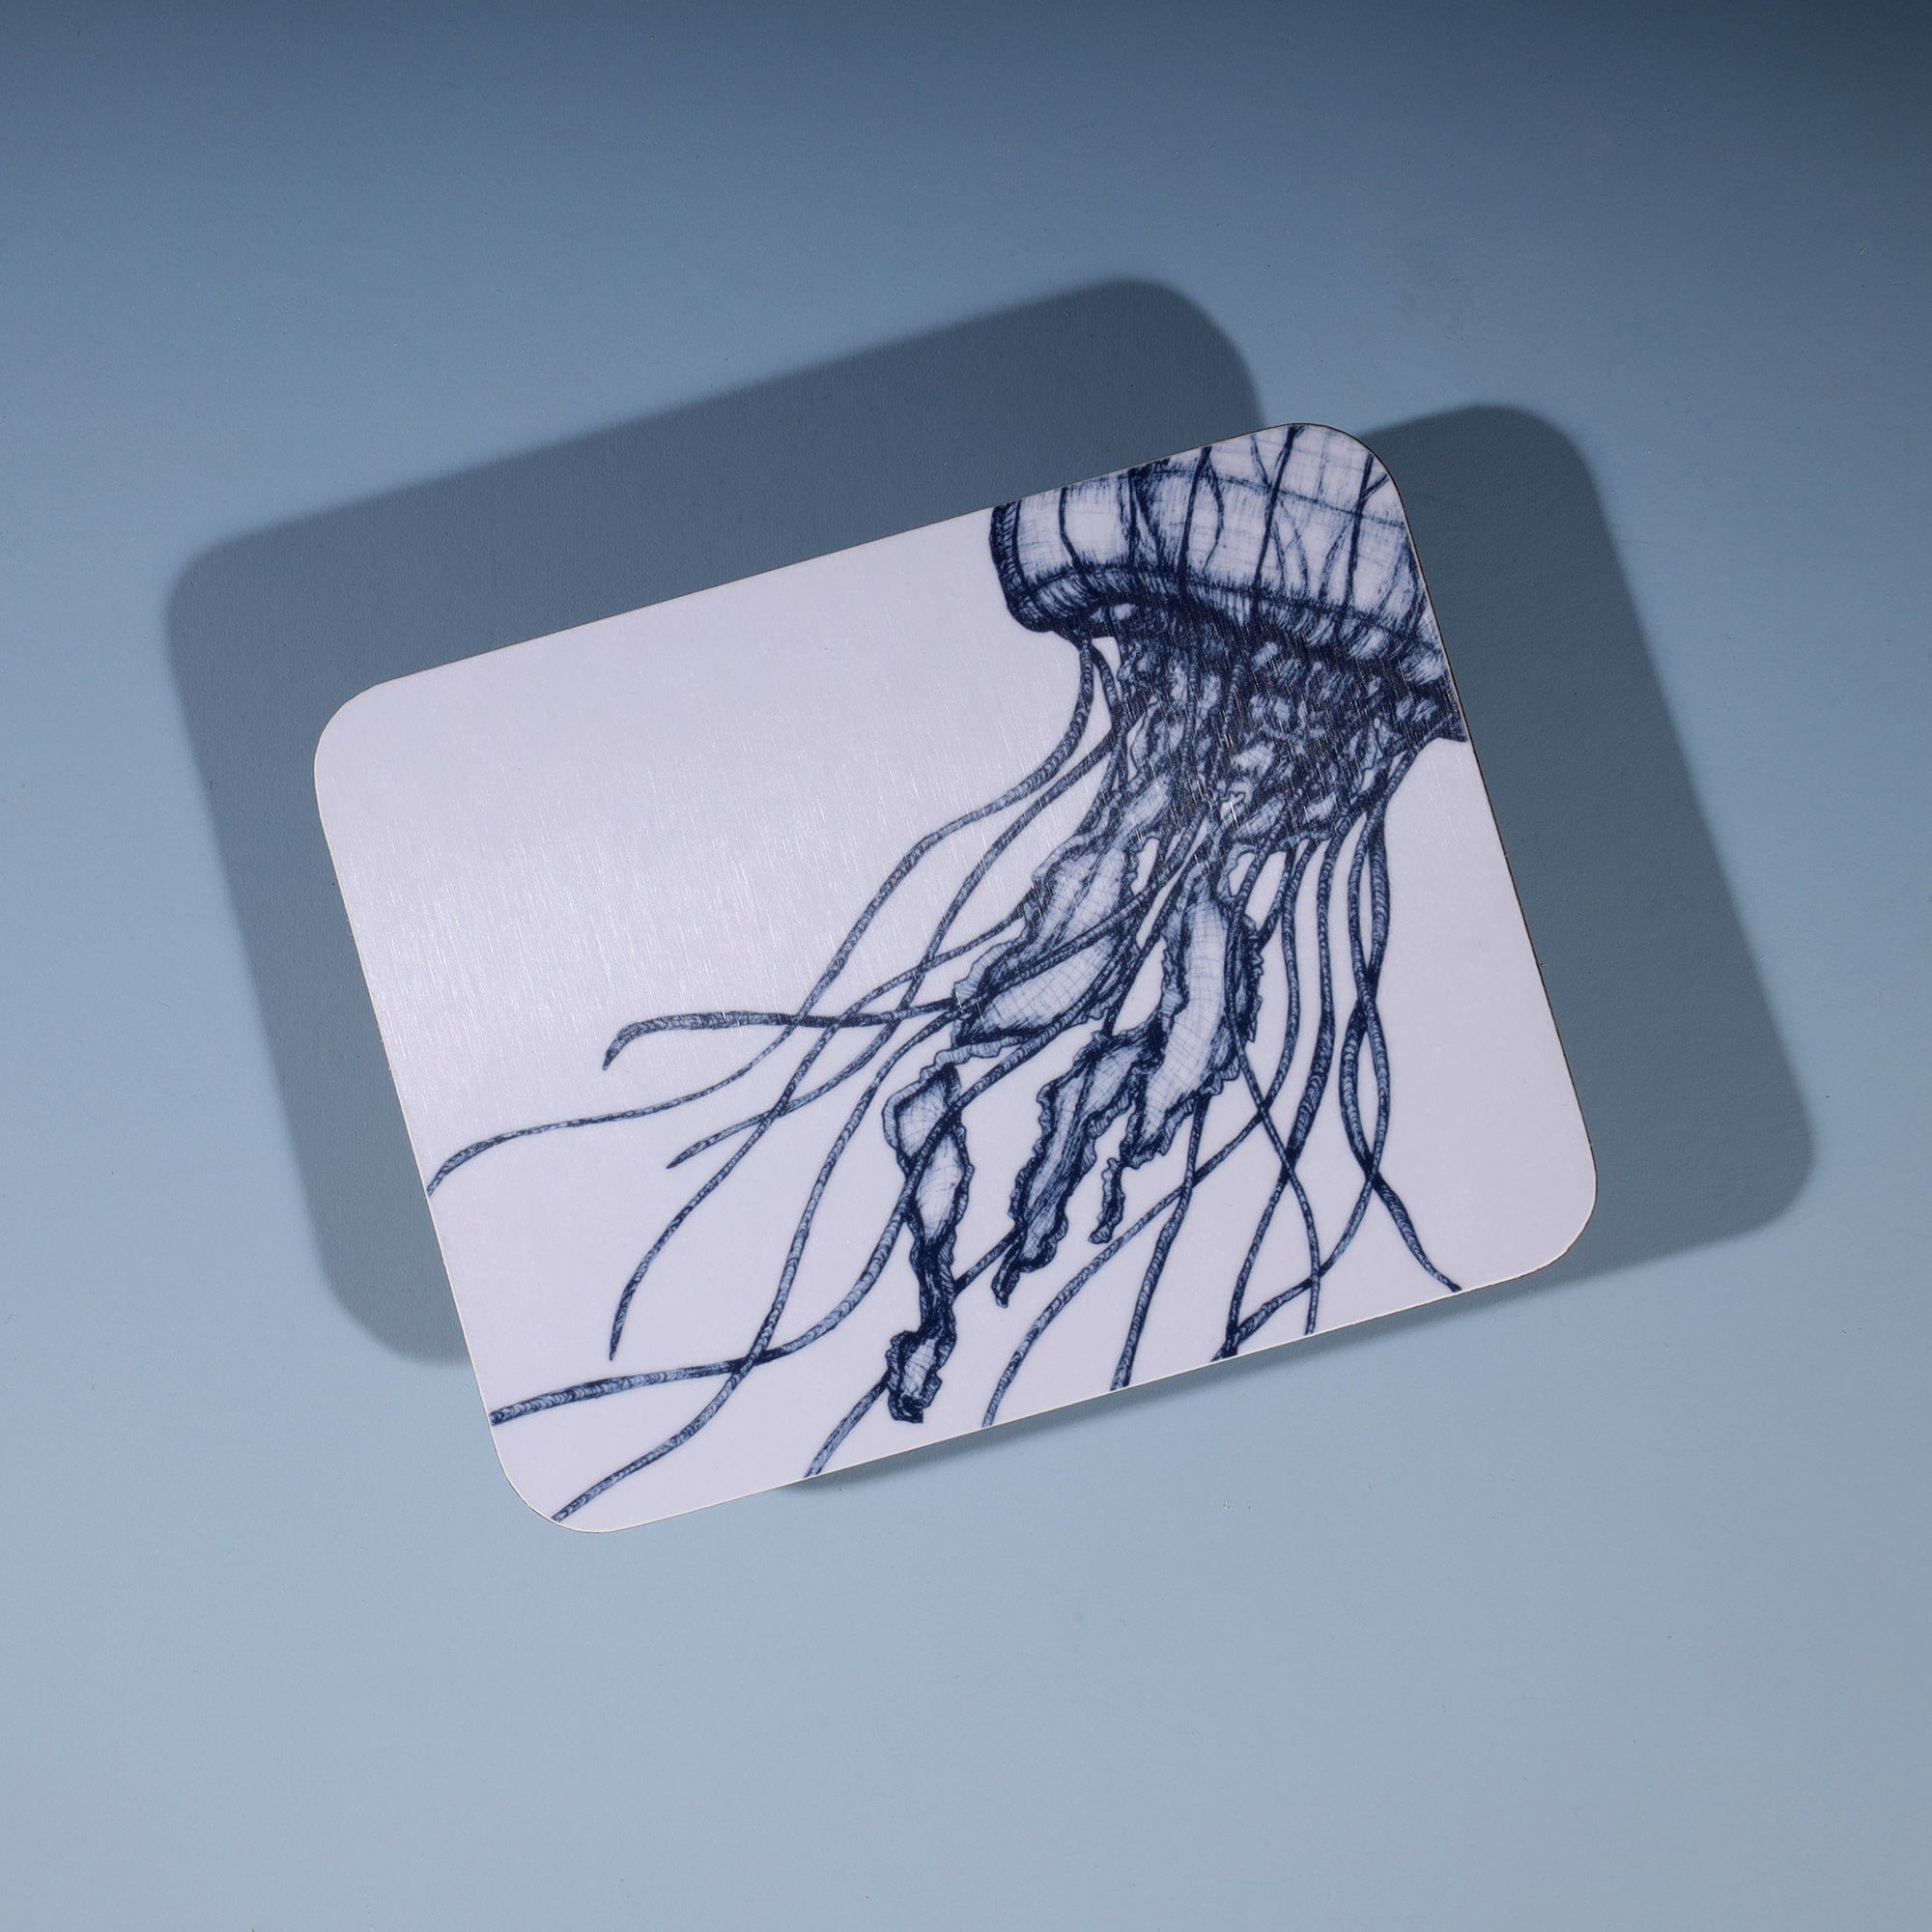 Jellyfish Design in Navy on a white Coaster